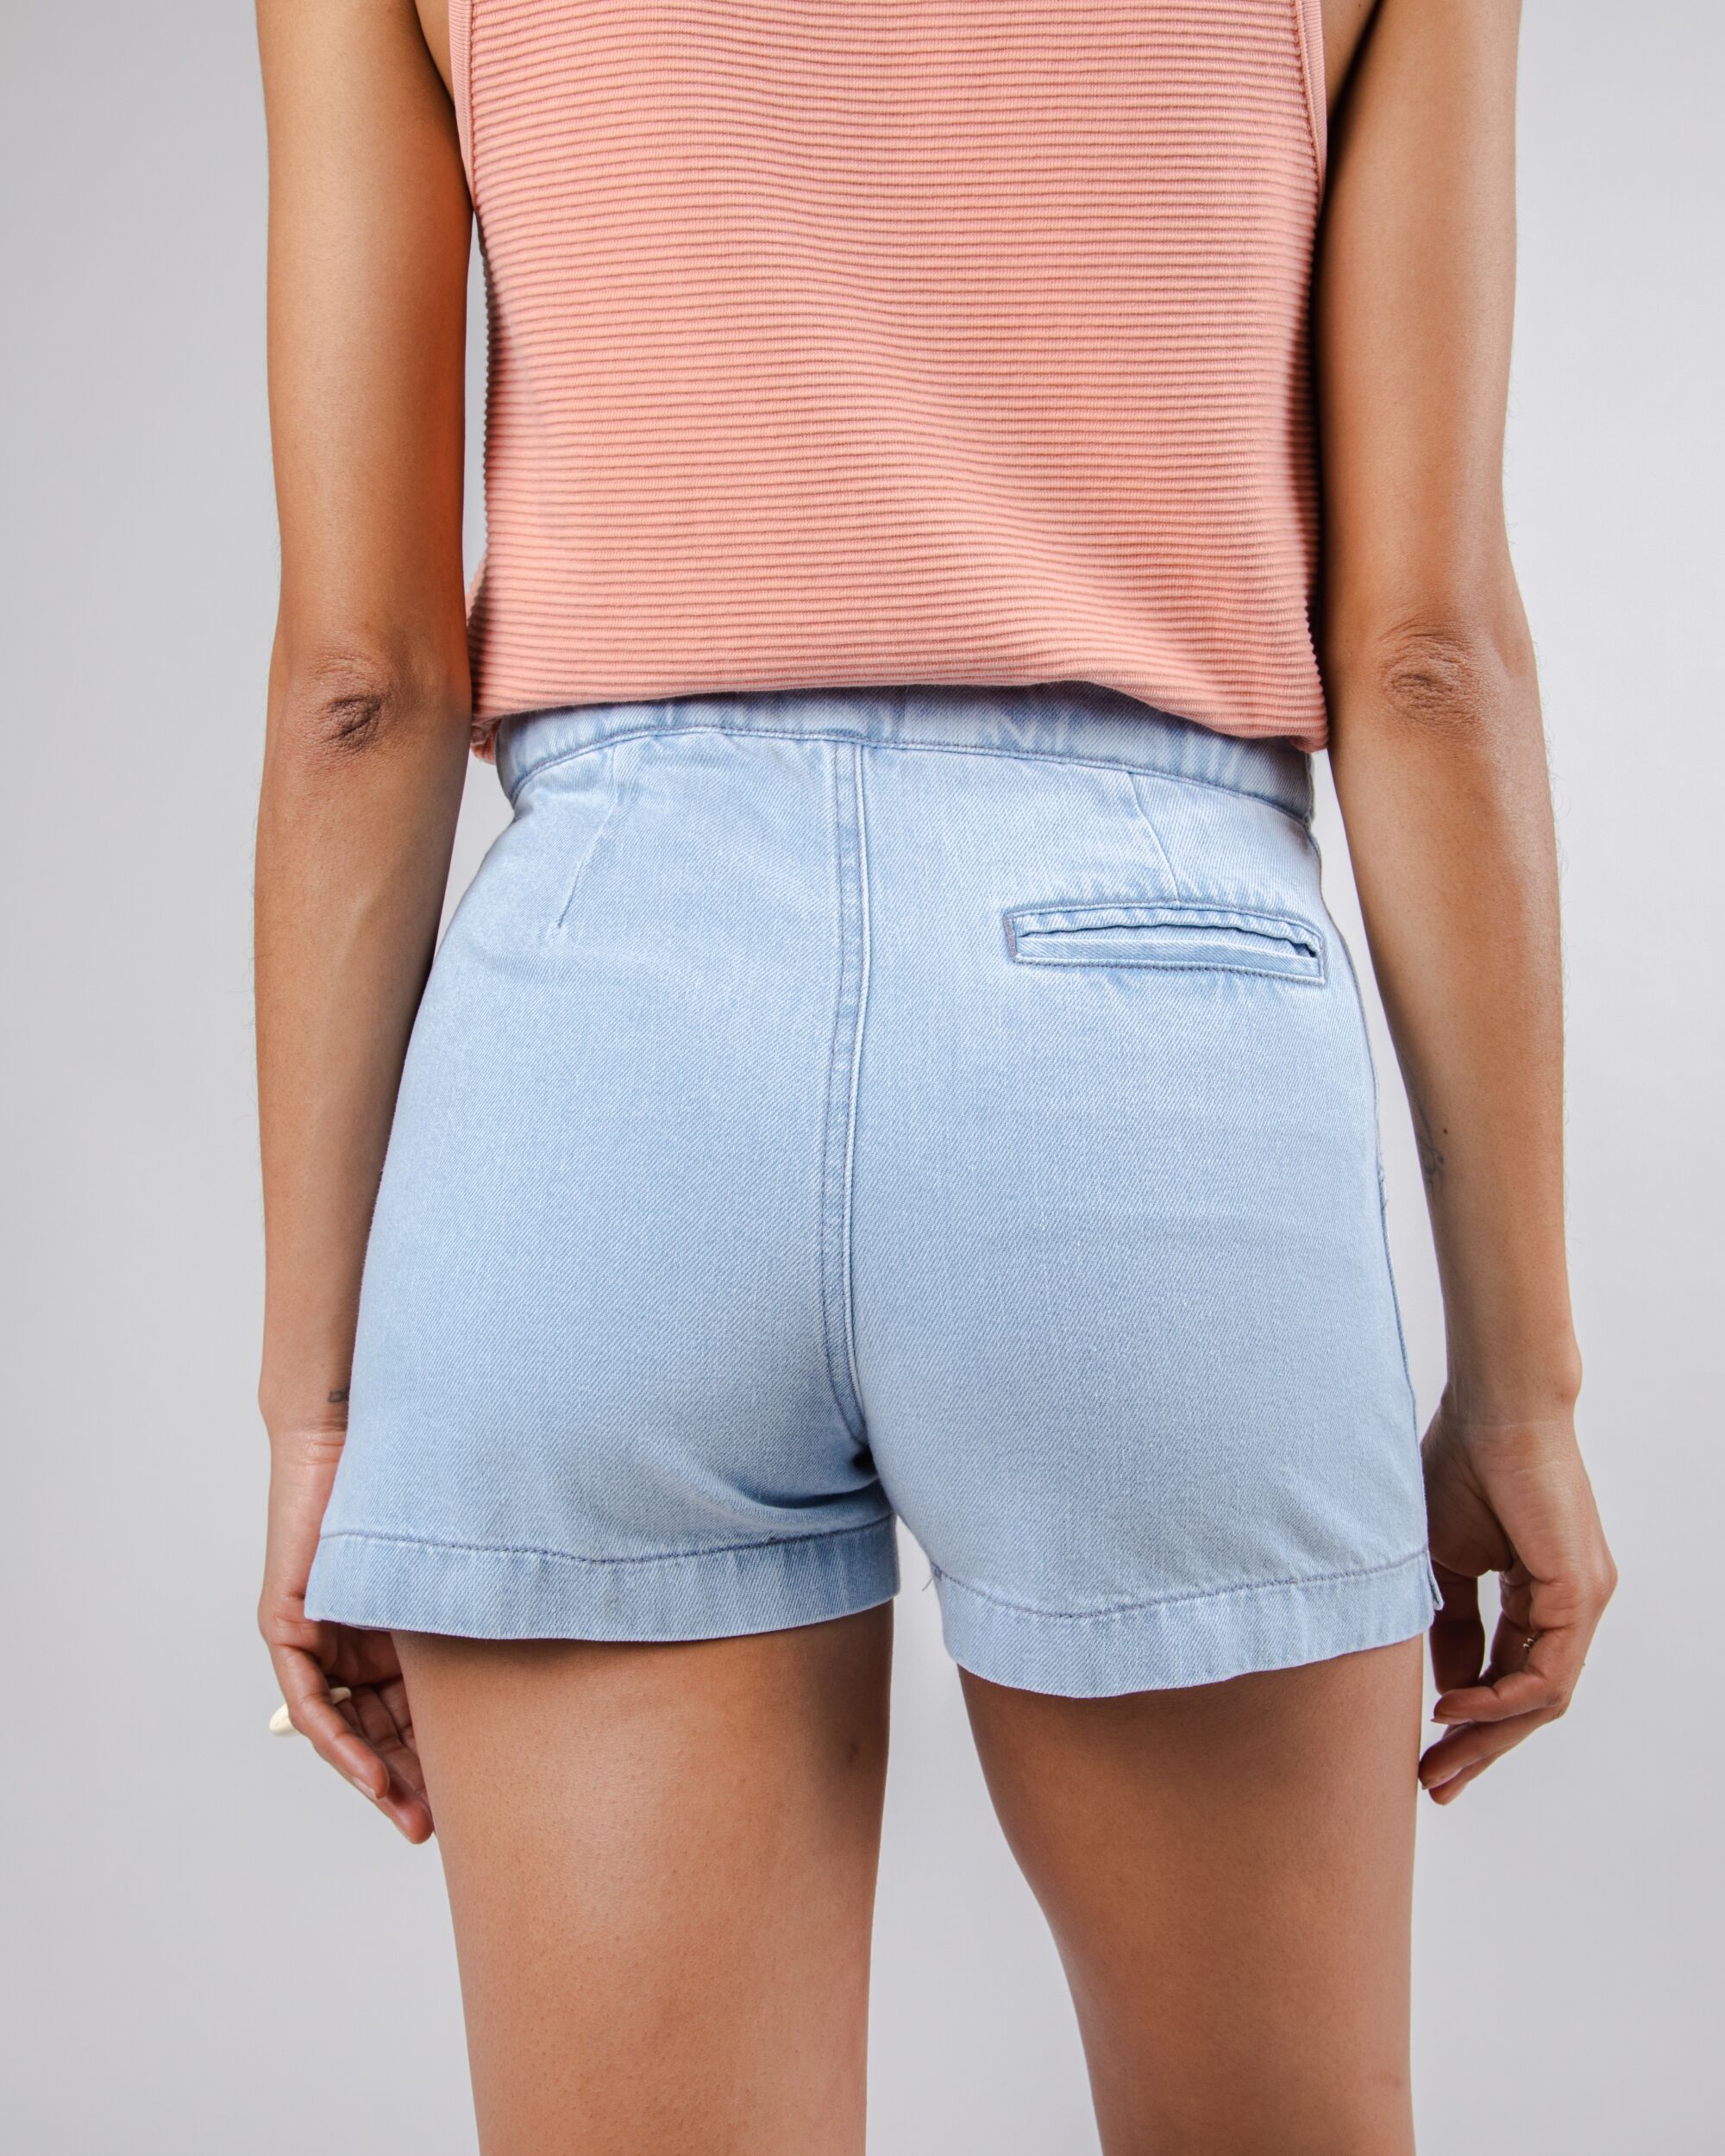 Blue Lola shorts made from cotton and recycled denim from Brava Fabrics